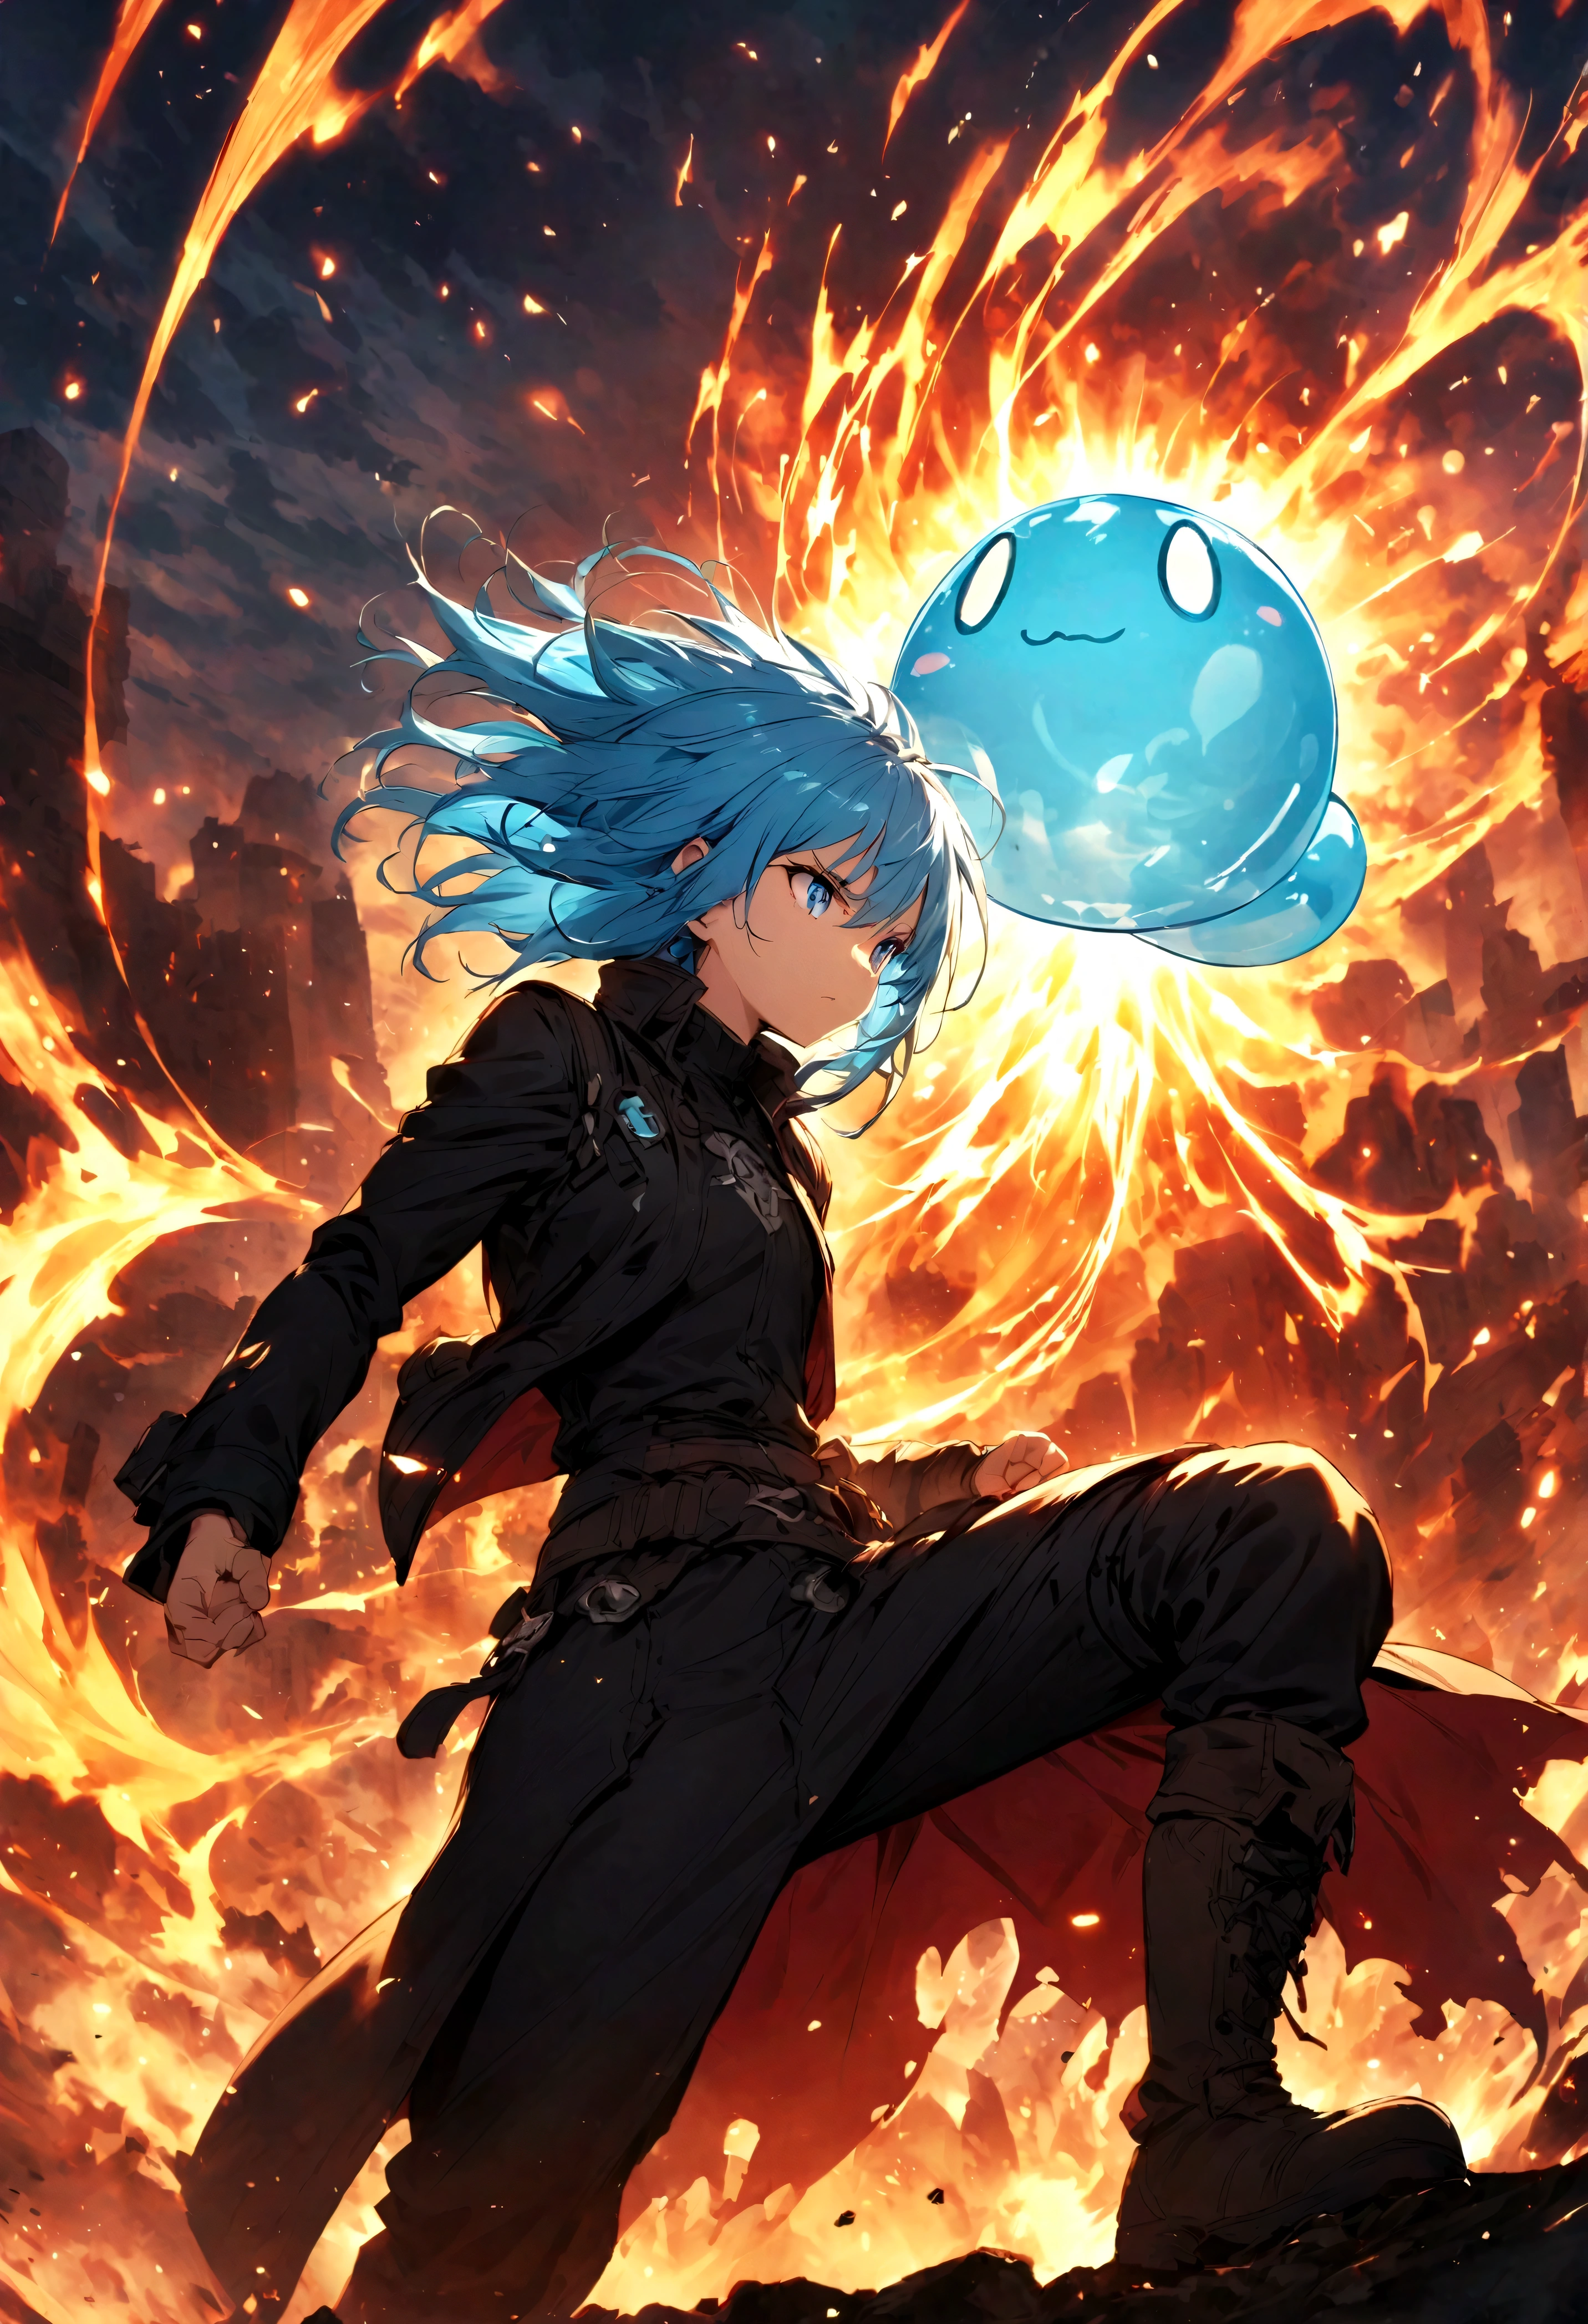 Rimuru Tempest,Create an action-packed battle scene featuring Rimuru Tempest from the manga and anime 'That Time I Got Reincarnated as a Slime'. Rimuru has blue hair and blue eyes, dressed in a stylish battle outfit like a black coat and boots. Capture him in a dynamic combat pose, perhaps casting a powerful spell or confronting an enemy, with a confident and determined expression. The background should depict a grand battlefield in a fantasy world, filled with magical effects and a war-torn landscape. Include intense special effects such as bursts of light, energy waves, and wind to emphasize the power of his magic. Highlight his aura and any transformation abilities, such as parts of his body showing his slime form. The scene should convey the intensity and drama of an epic battle.